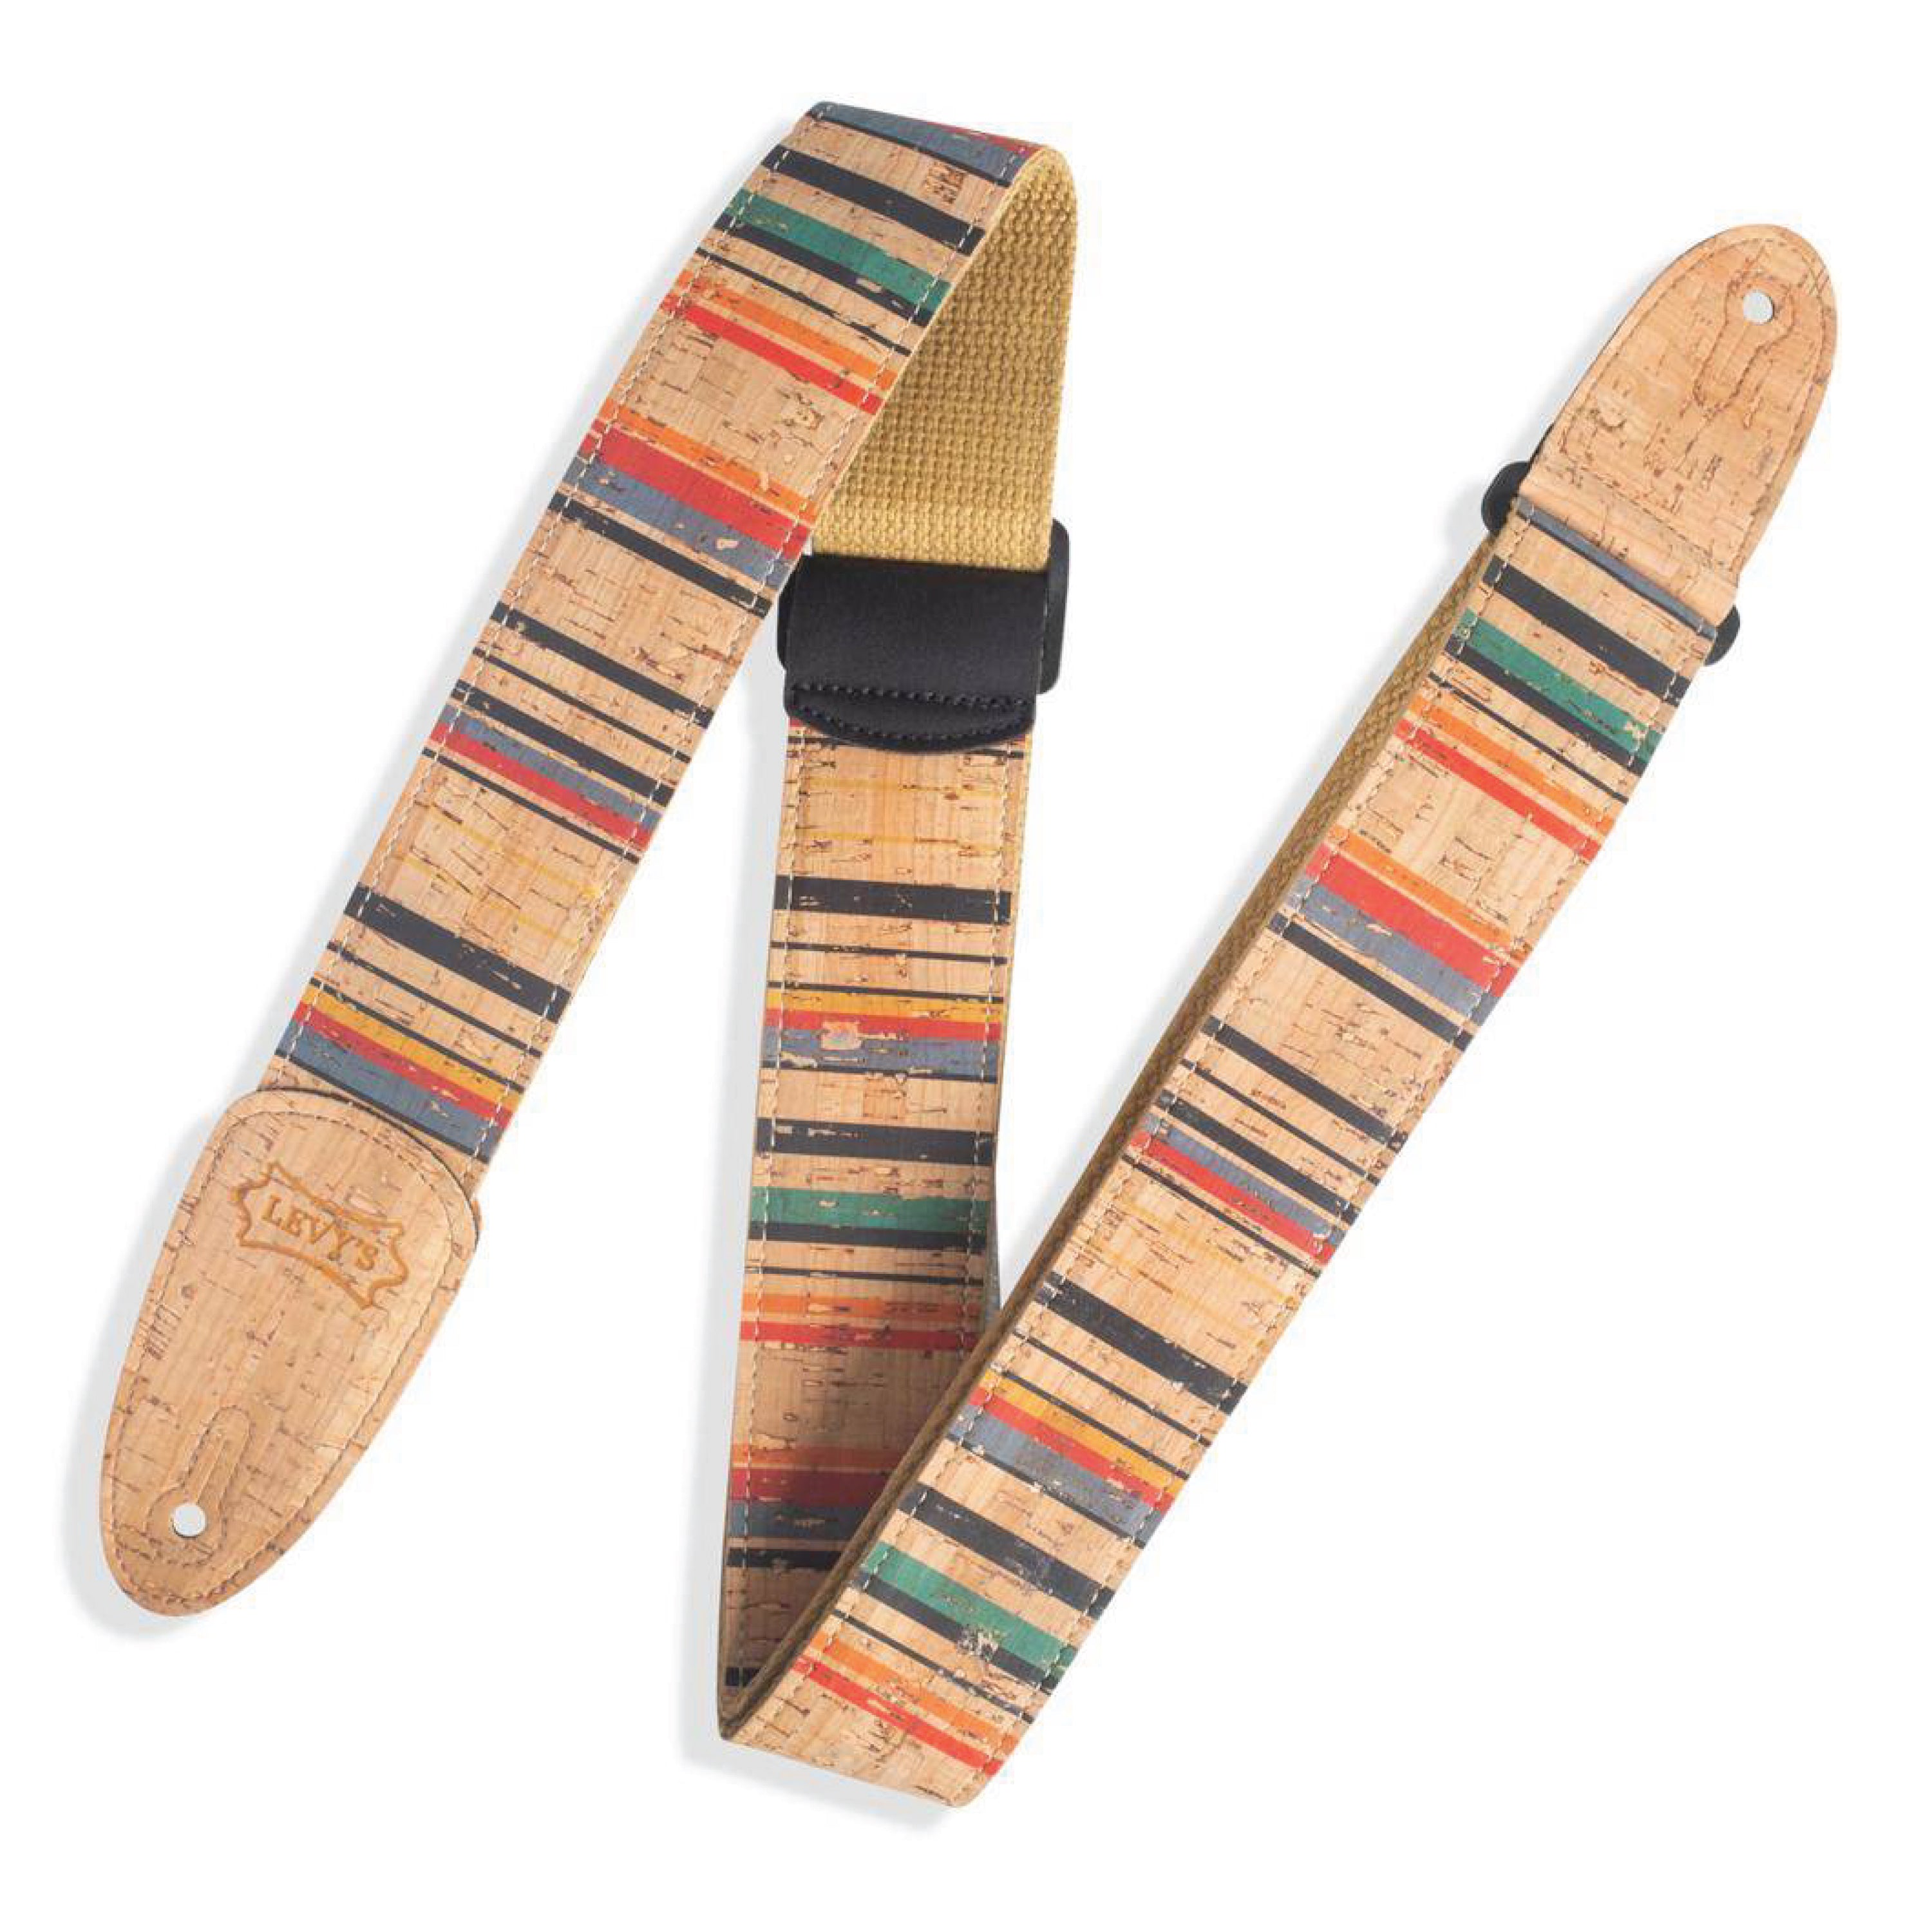 Levy's MX8-003 Specialty Series Guitar Strap, Nantucket Cork White, Blue, Red, Yellow